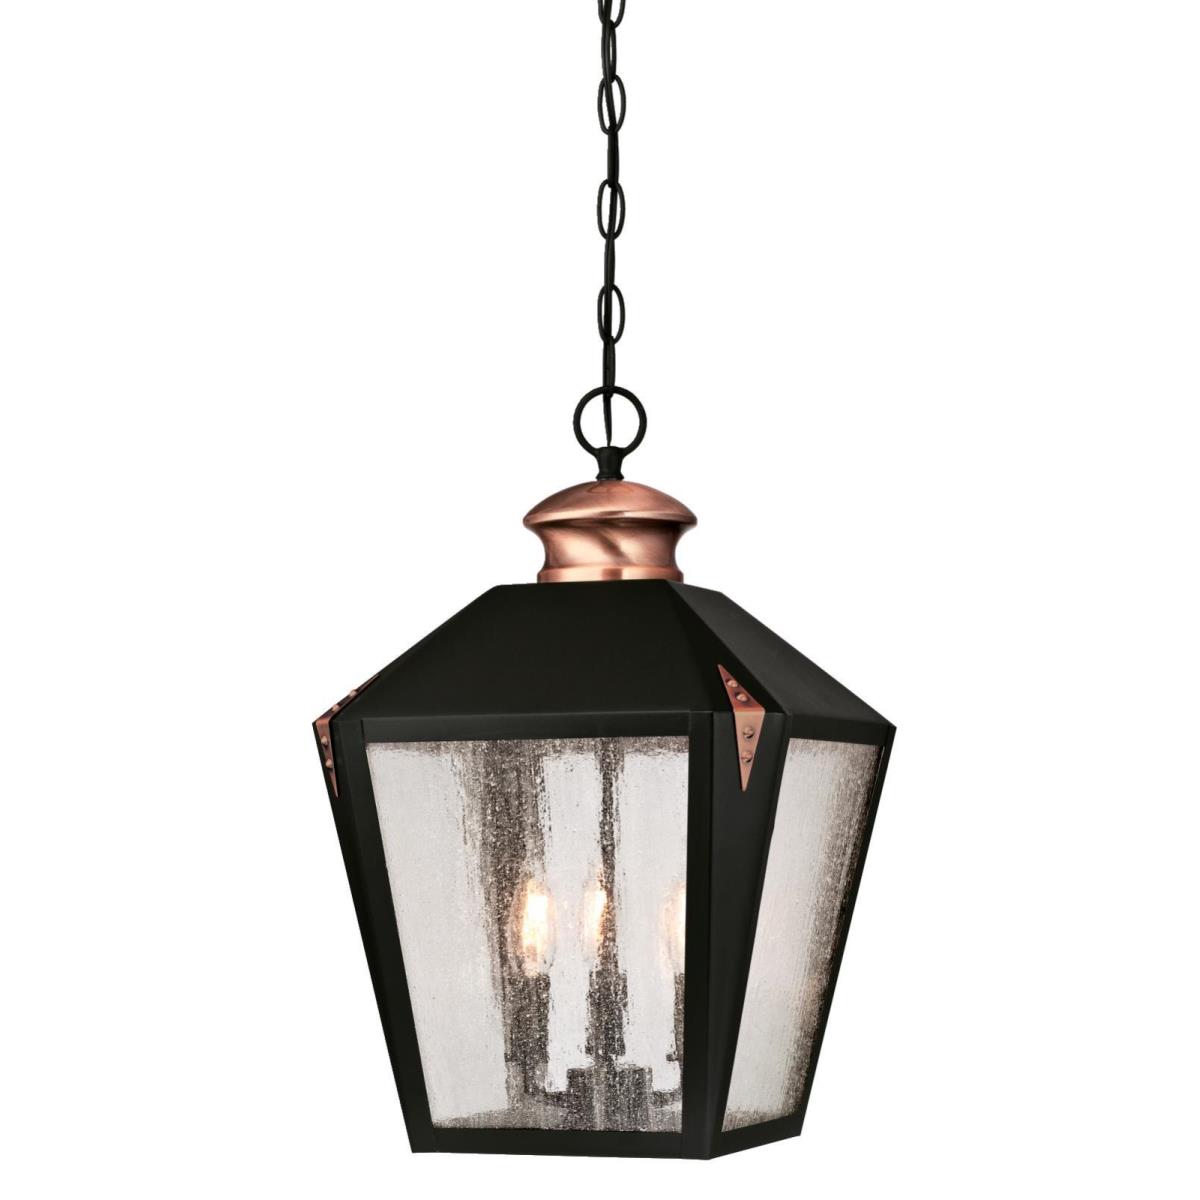 3 Light Pendant Matte Black Finish with Washed Copper Accents and Clear Seeded Glass